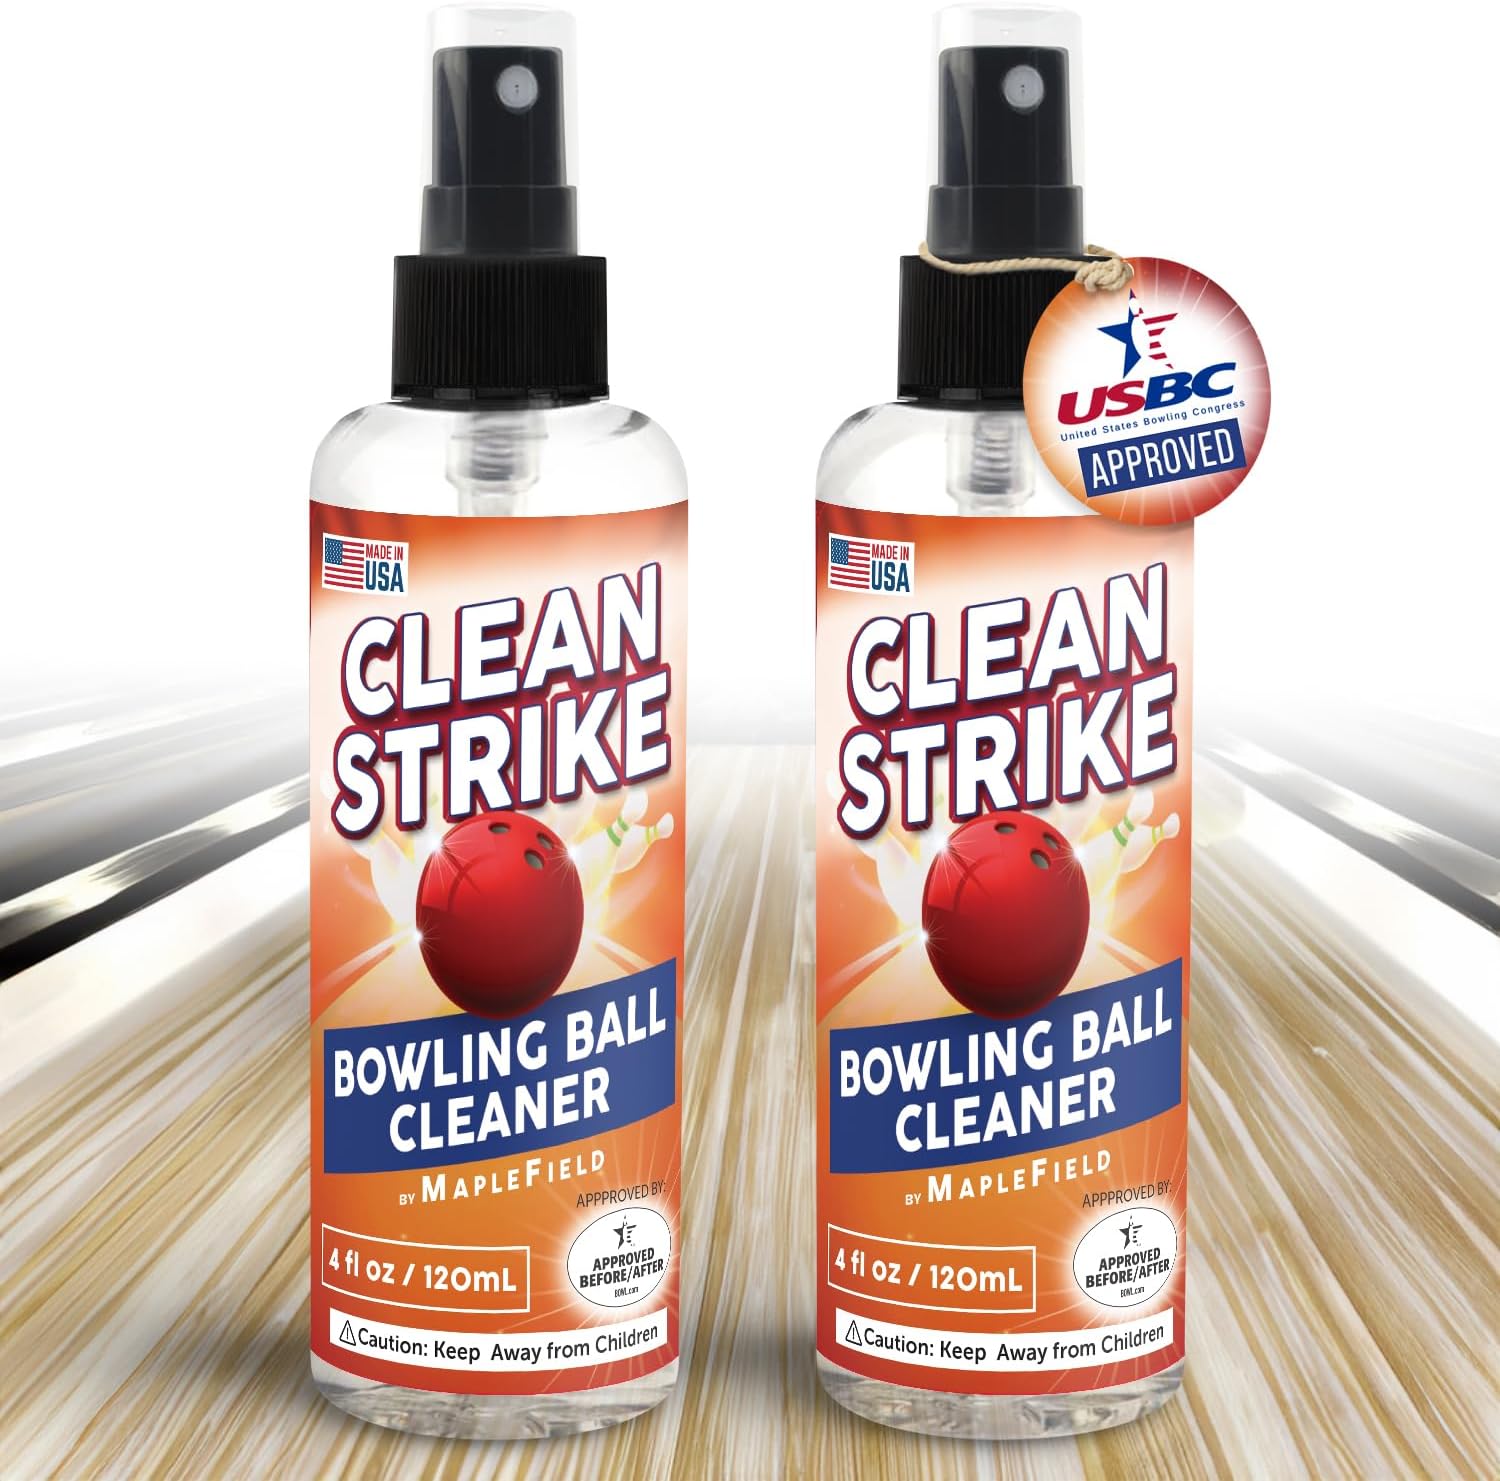 Maplefield Bowling Ball Cleaner Spray 2-Pack - 4 oz - USBC Compliant Bowling Accessory - Removes Oil, Stains,  Scuffs - Enhances Grip  Restores Tack - Compact, Travel-Friendly Size